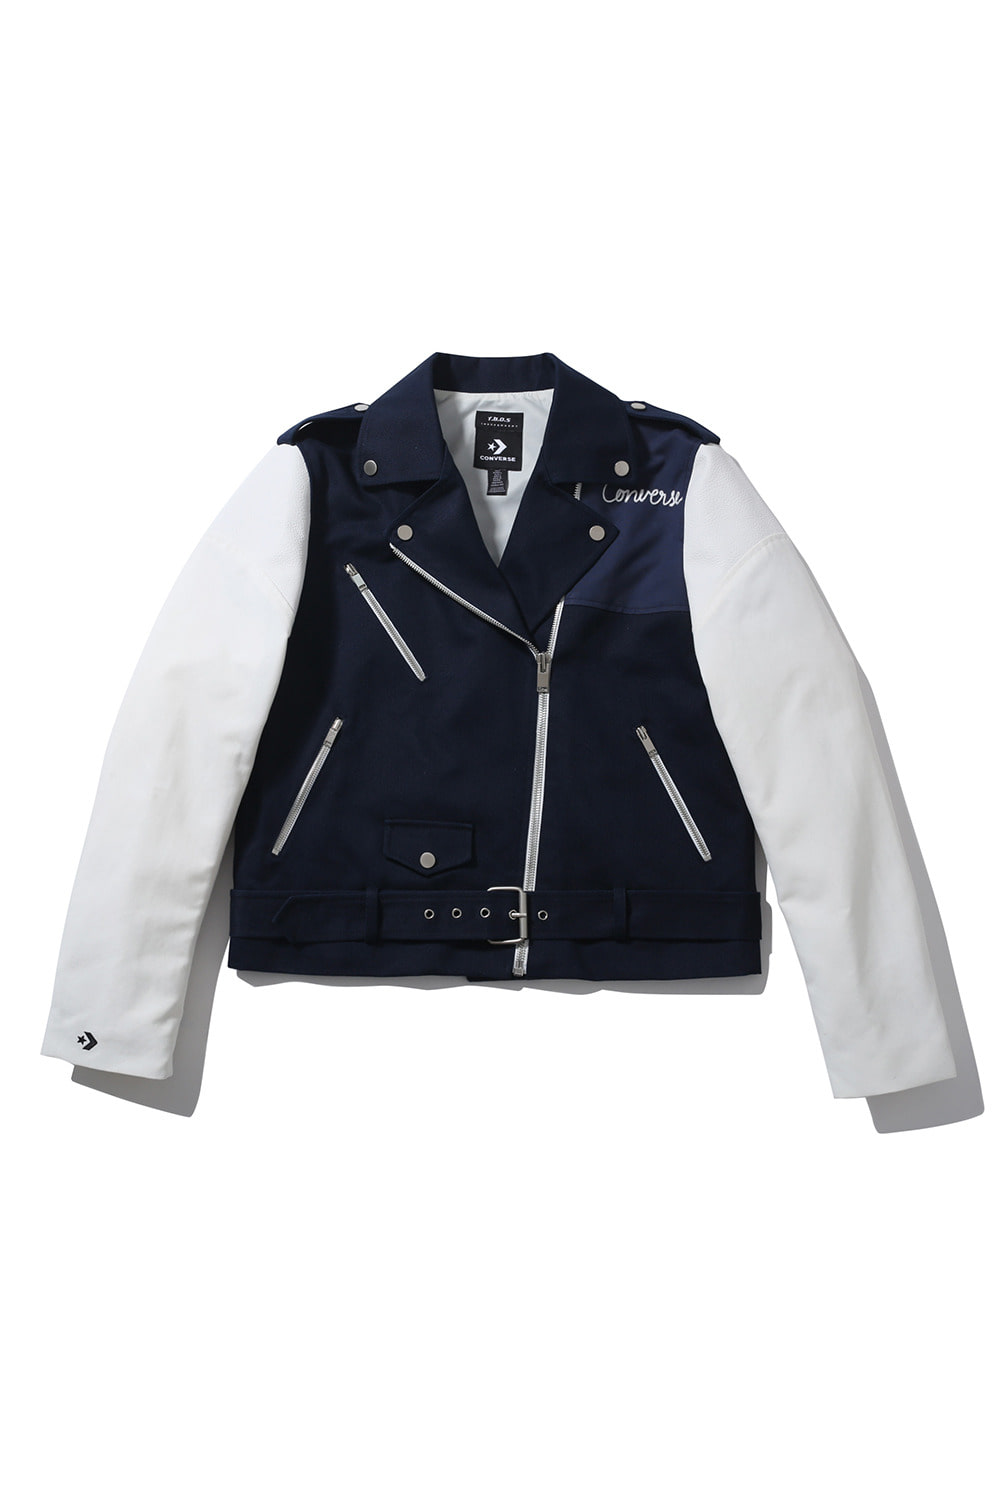 T.B.O.S x CONVERSE Restructured Rider Jacket